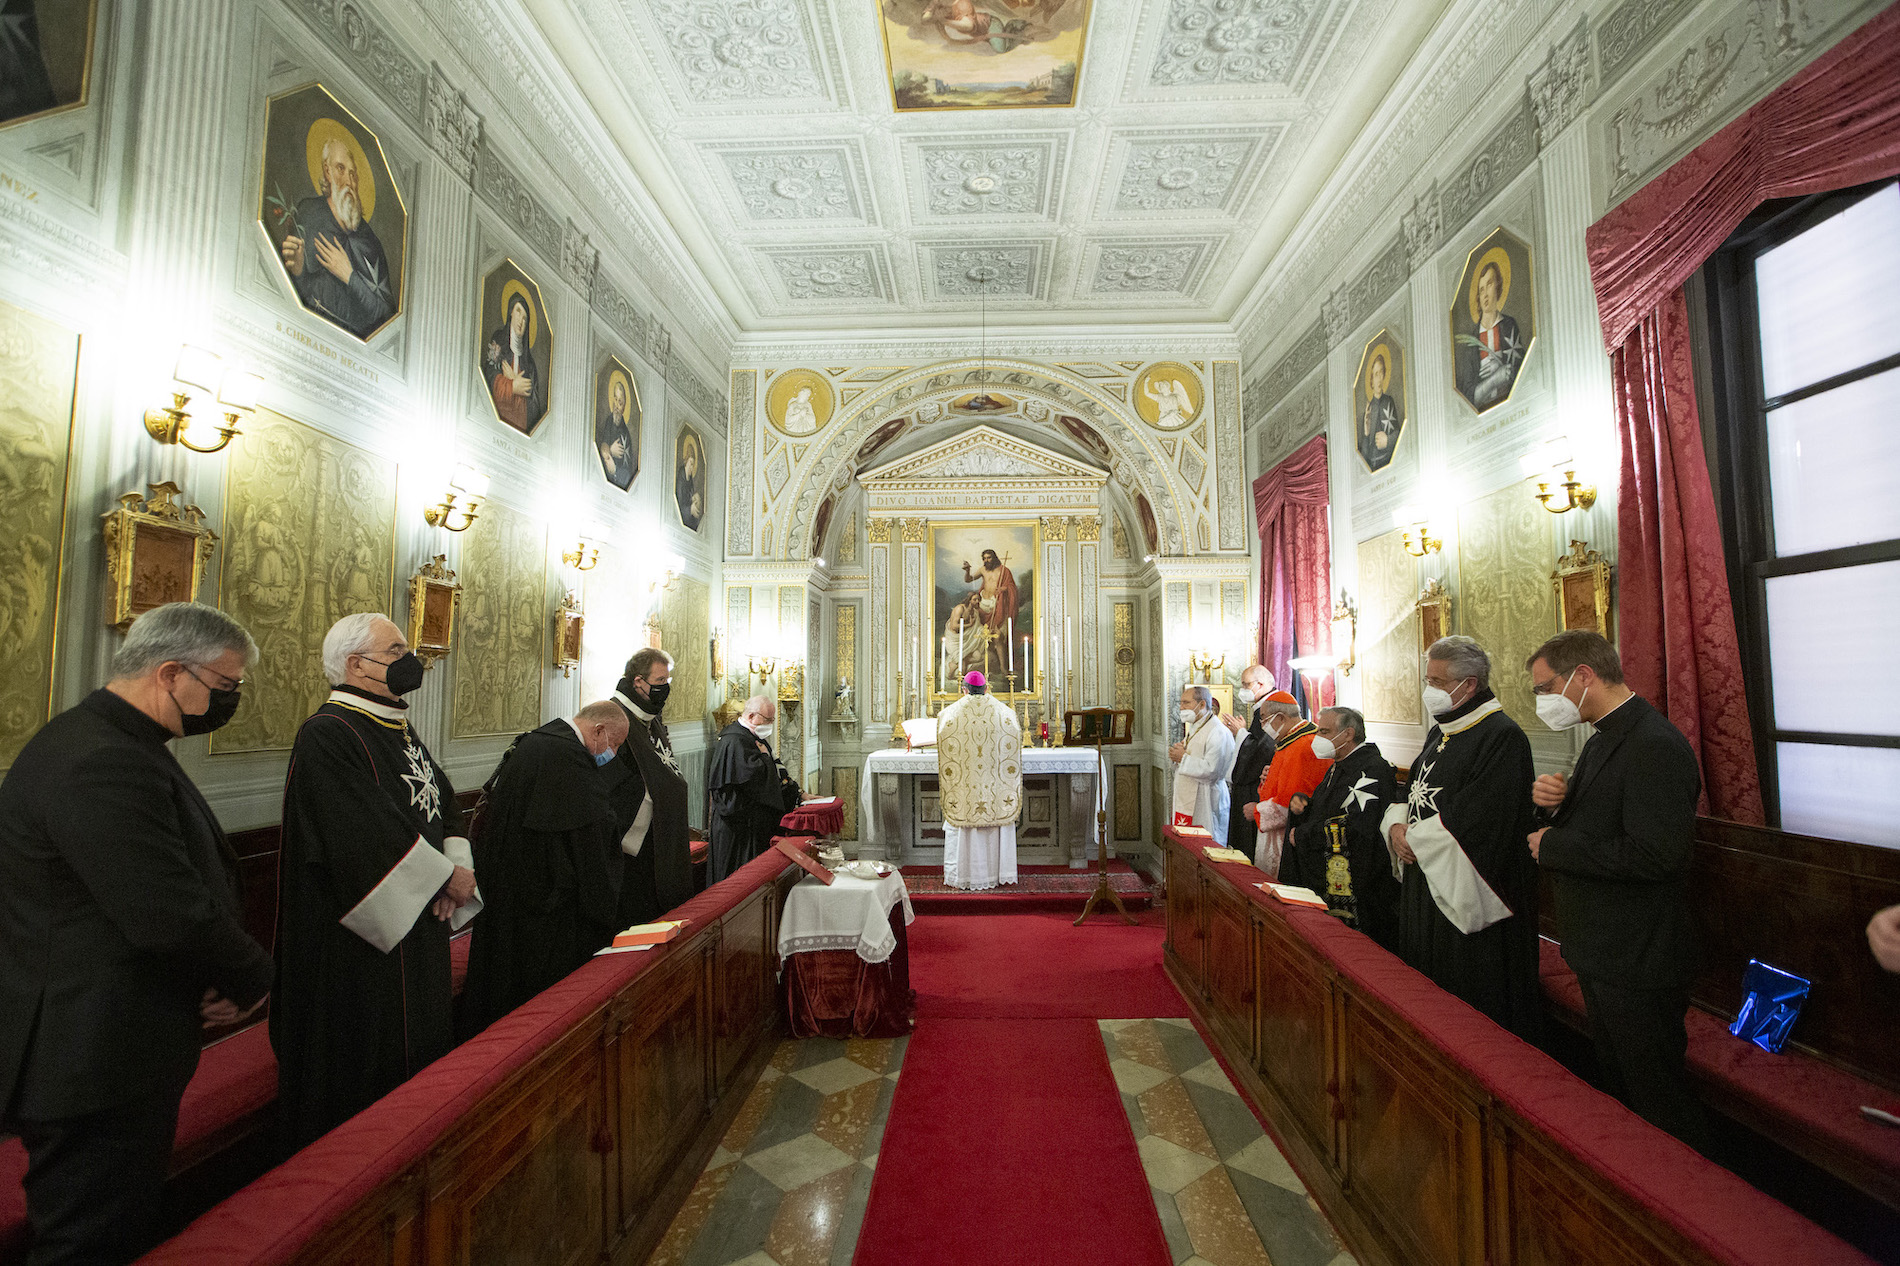 Vicar General of His Holiness for the Diocese of Rome received in the Order